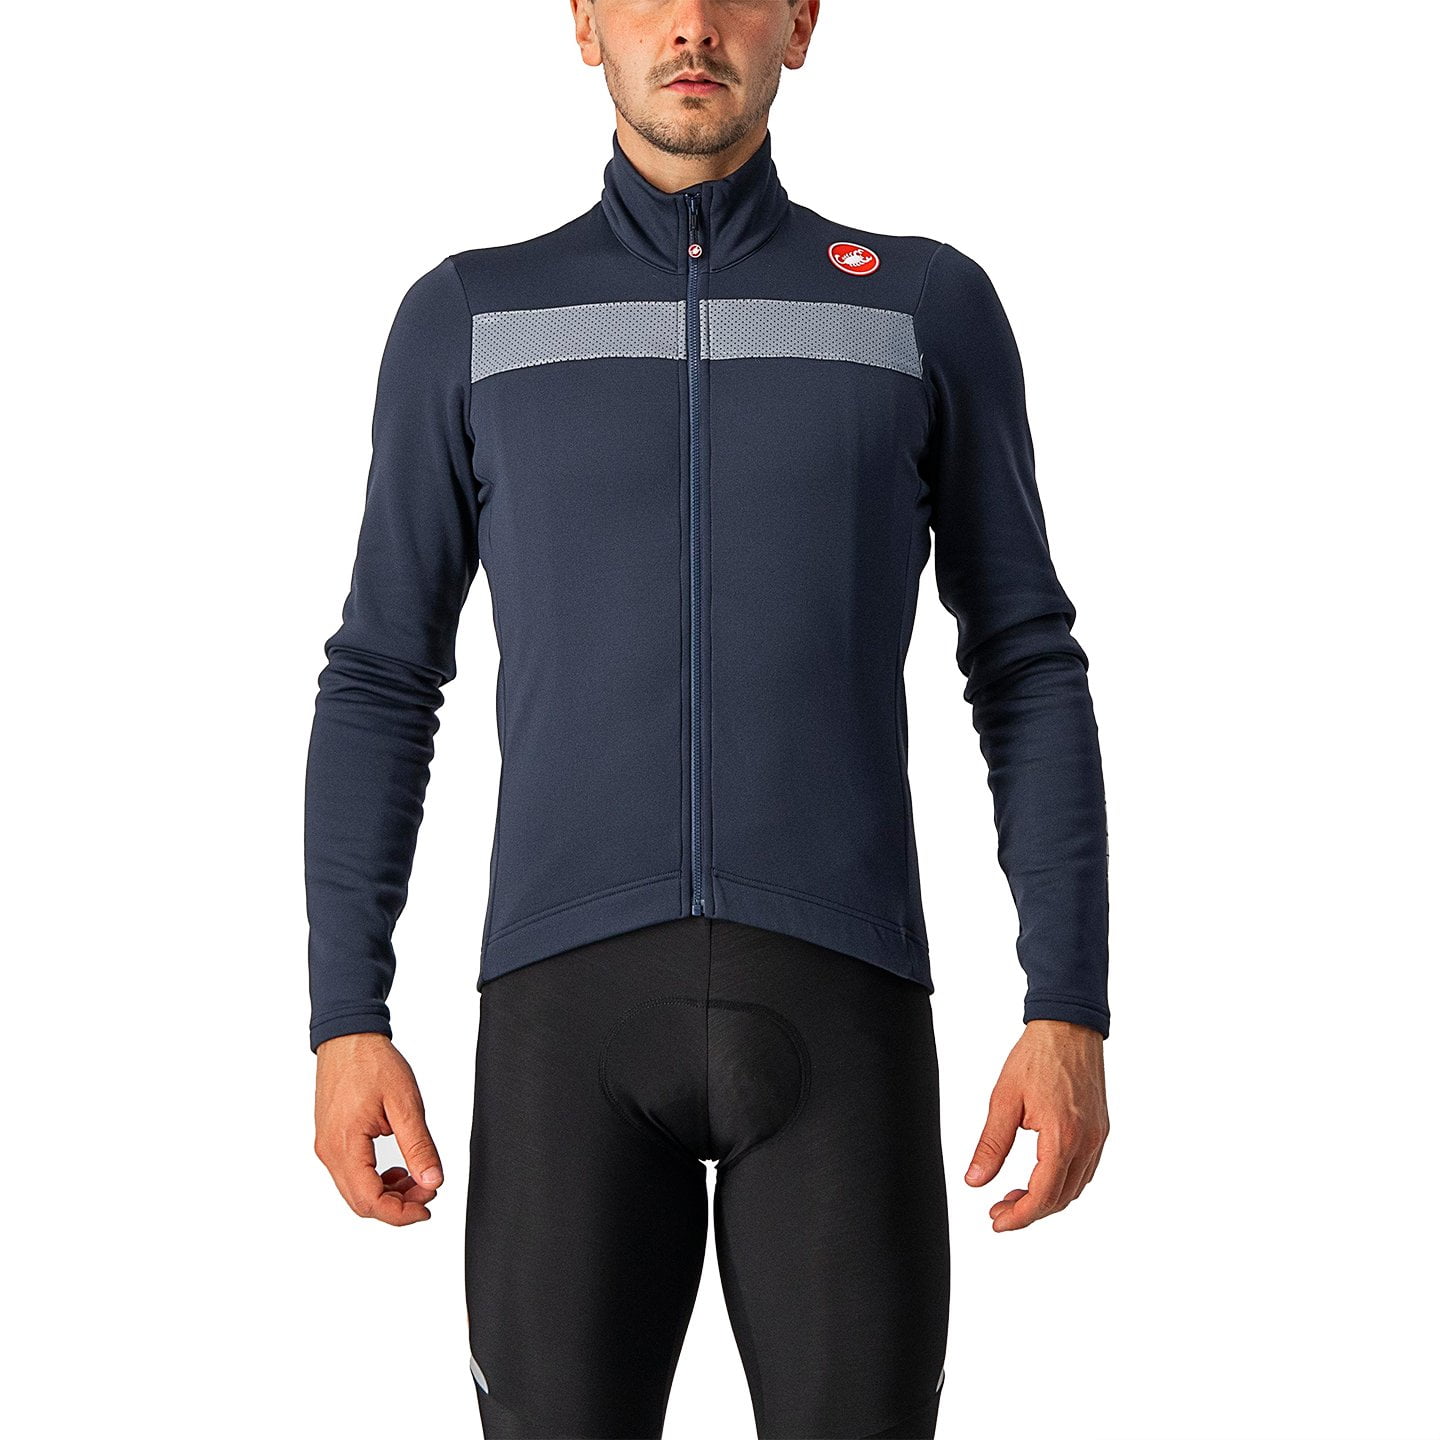 CASTELLI Puro 3 Long Sleeve Jersey Long Sleeve Jersey, for men, size 2XL, Cycling jersey, Cycle clothing